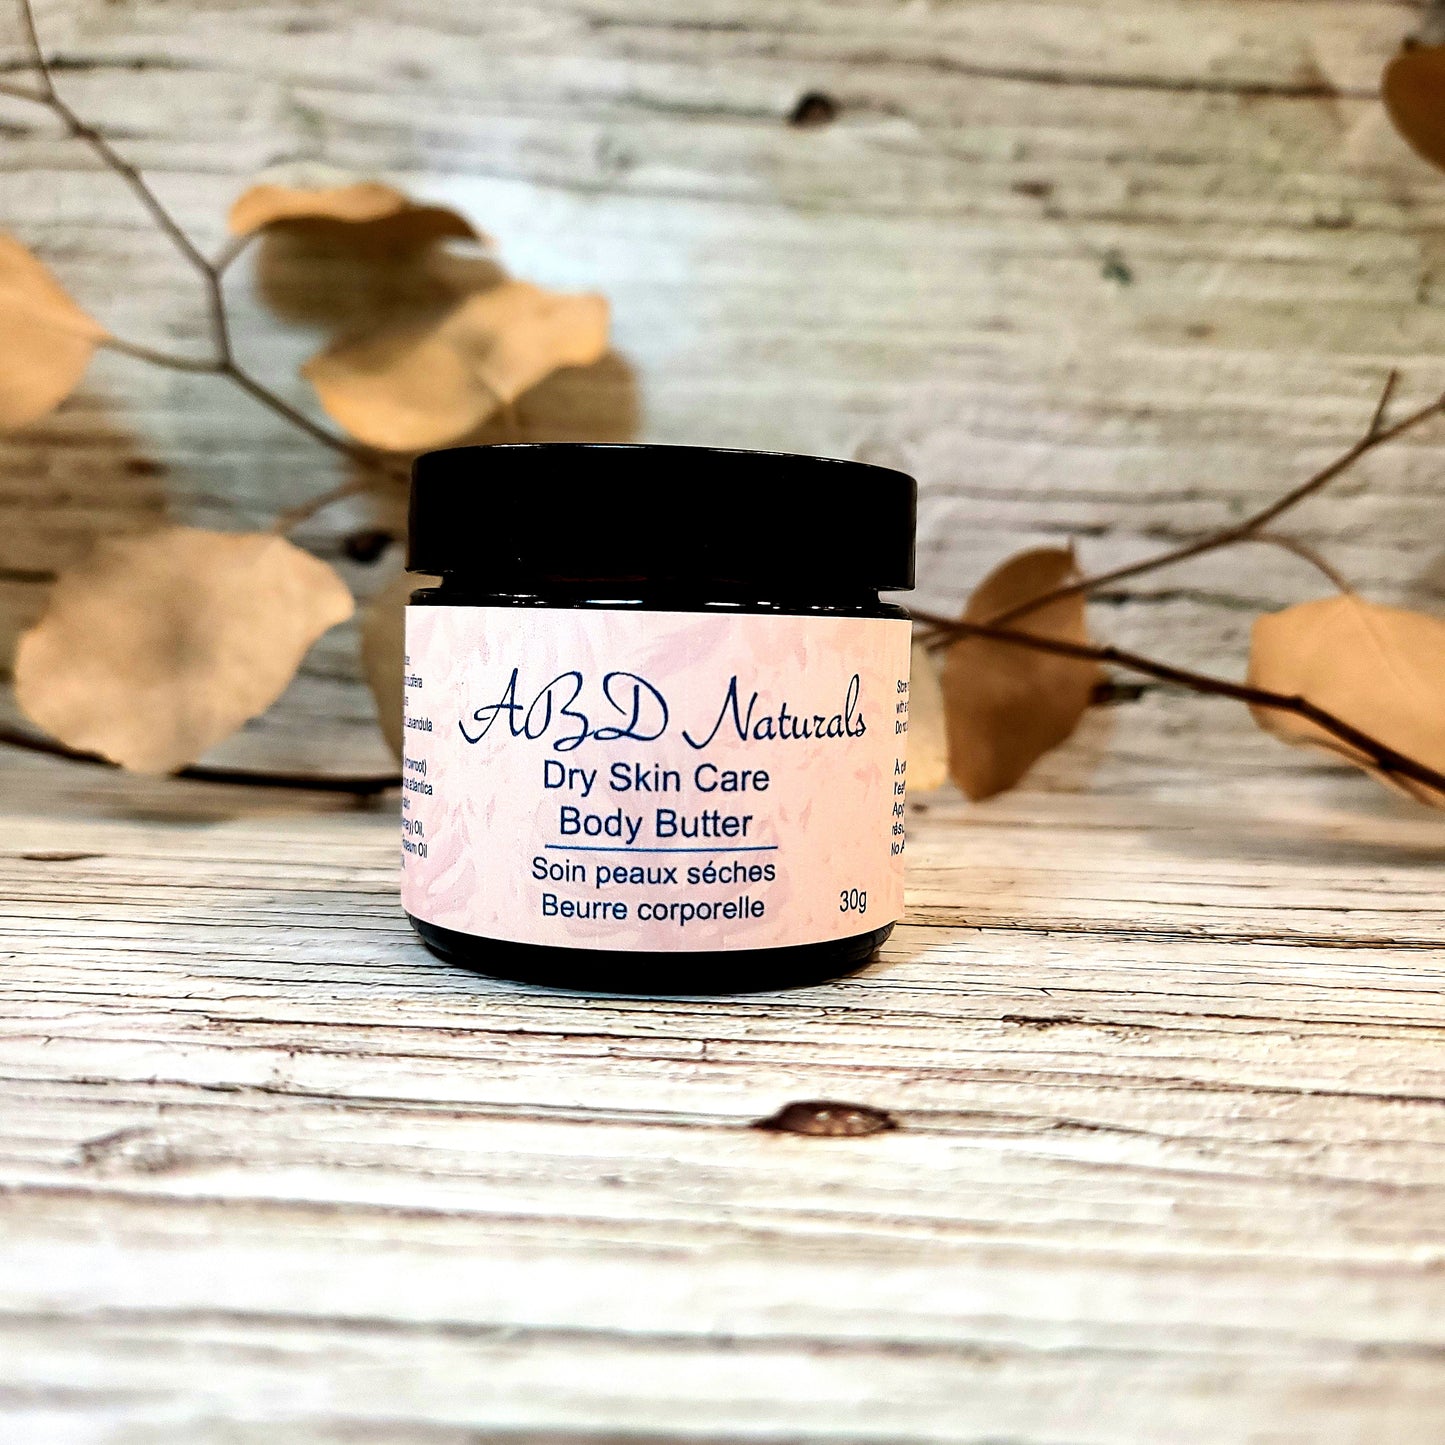 Dry skin care Body Butter